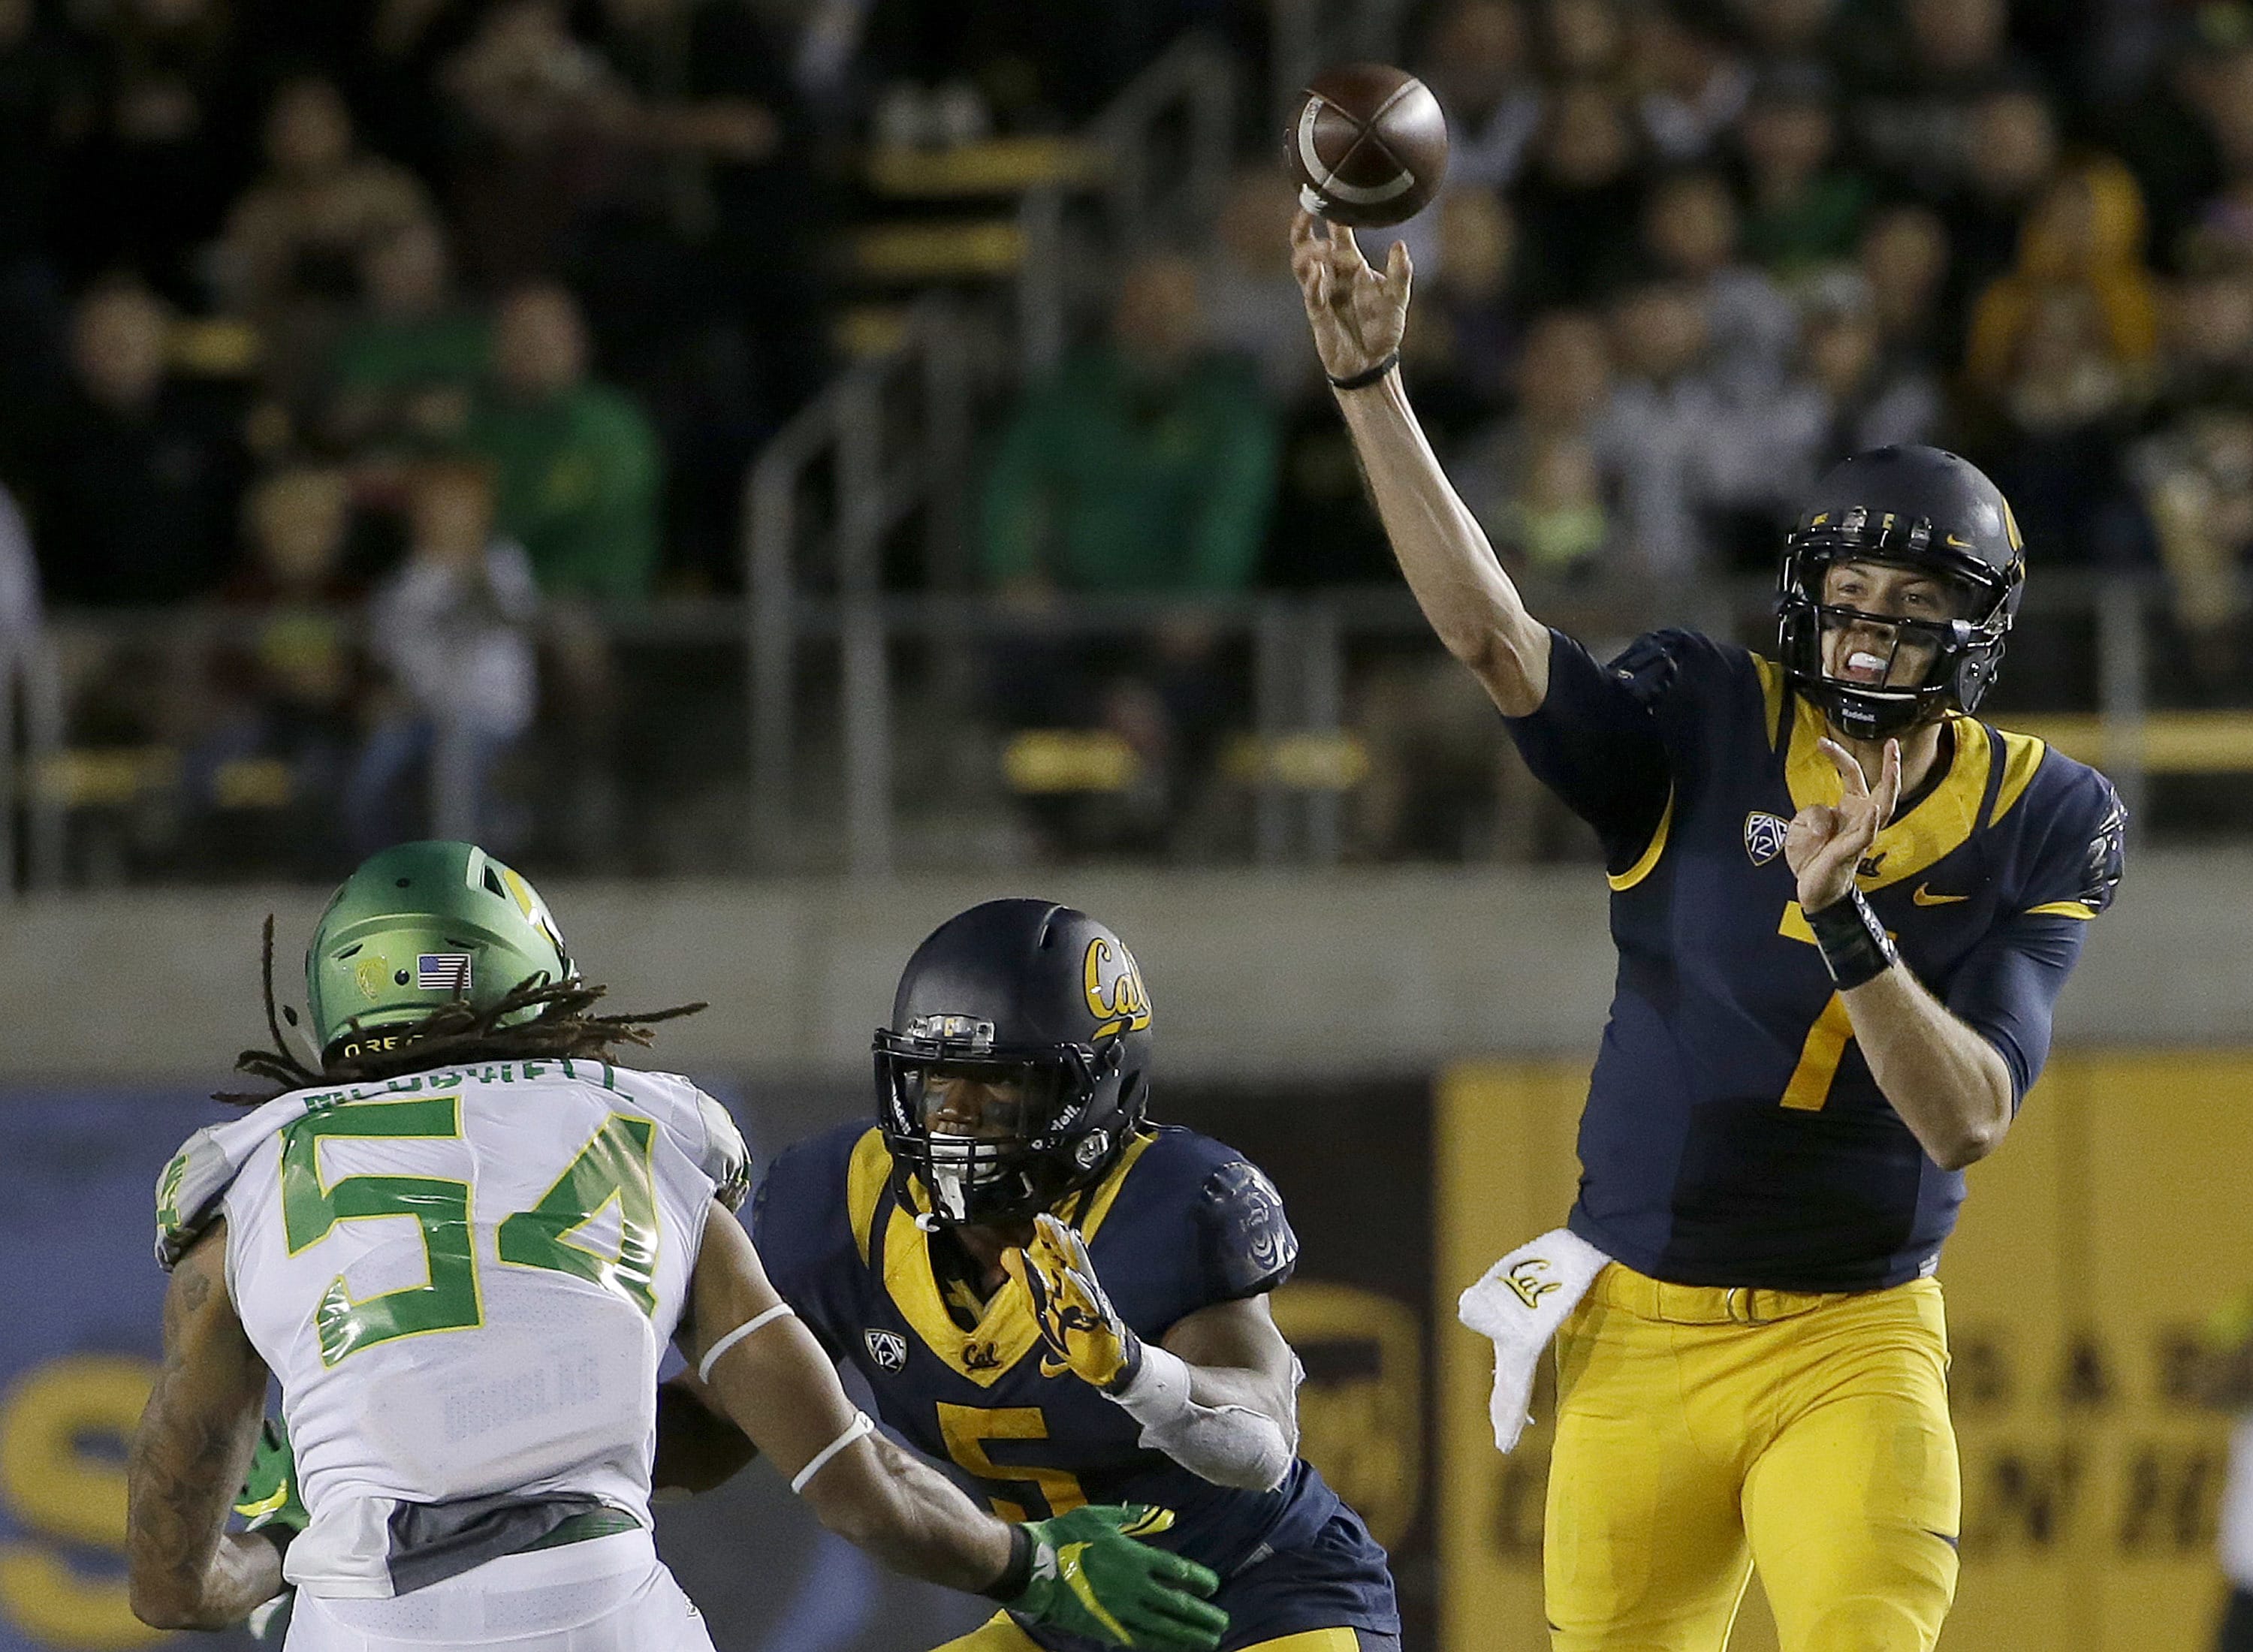 California quarterback Davis Webb (7) passes against Oregon during the first half of an NCAA college football game in Berkeley, Calif., Friday, Oct. 21, 2016.